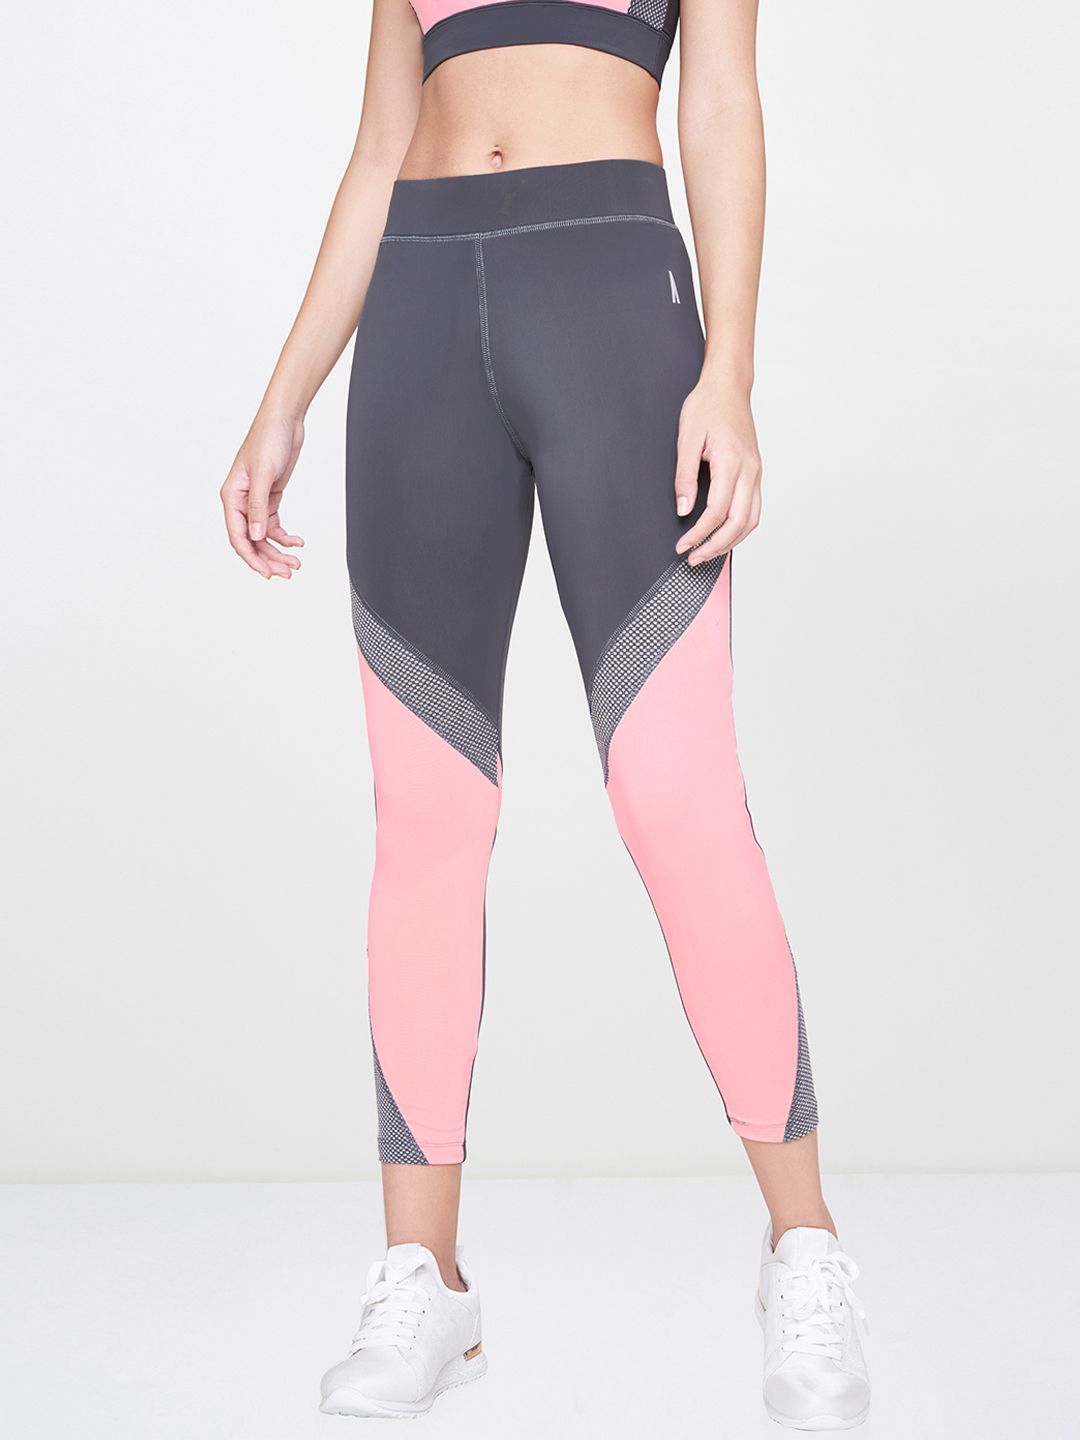 AND Women Charcoal Grey & Peach-Coloured Colourblocked Cropped Activewear Tights Price in India